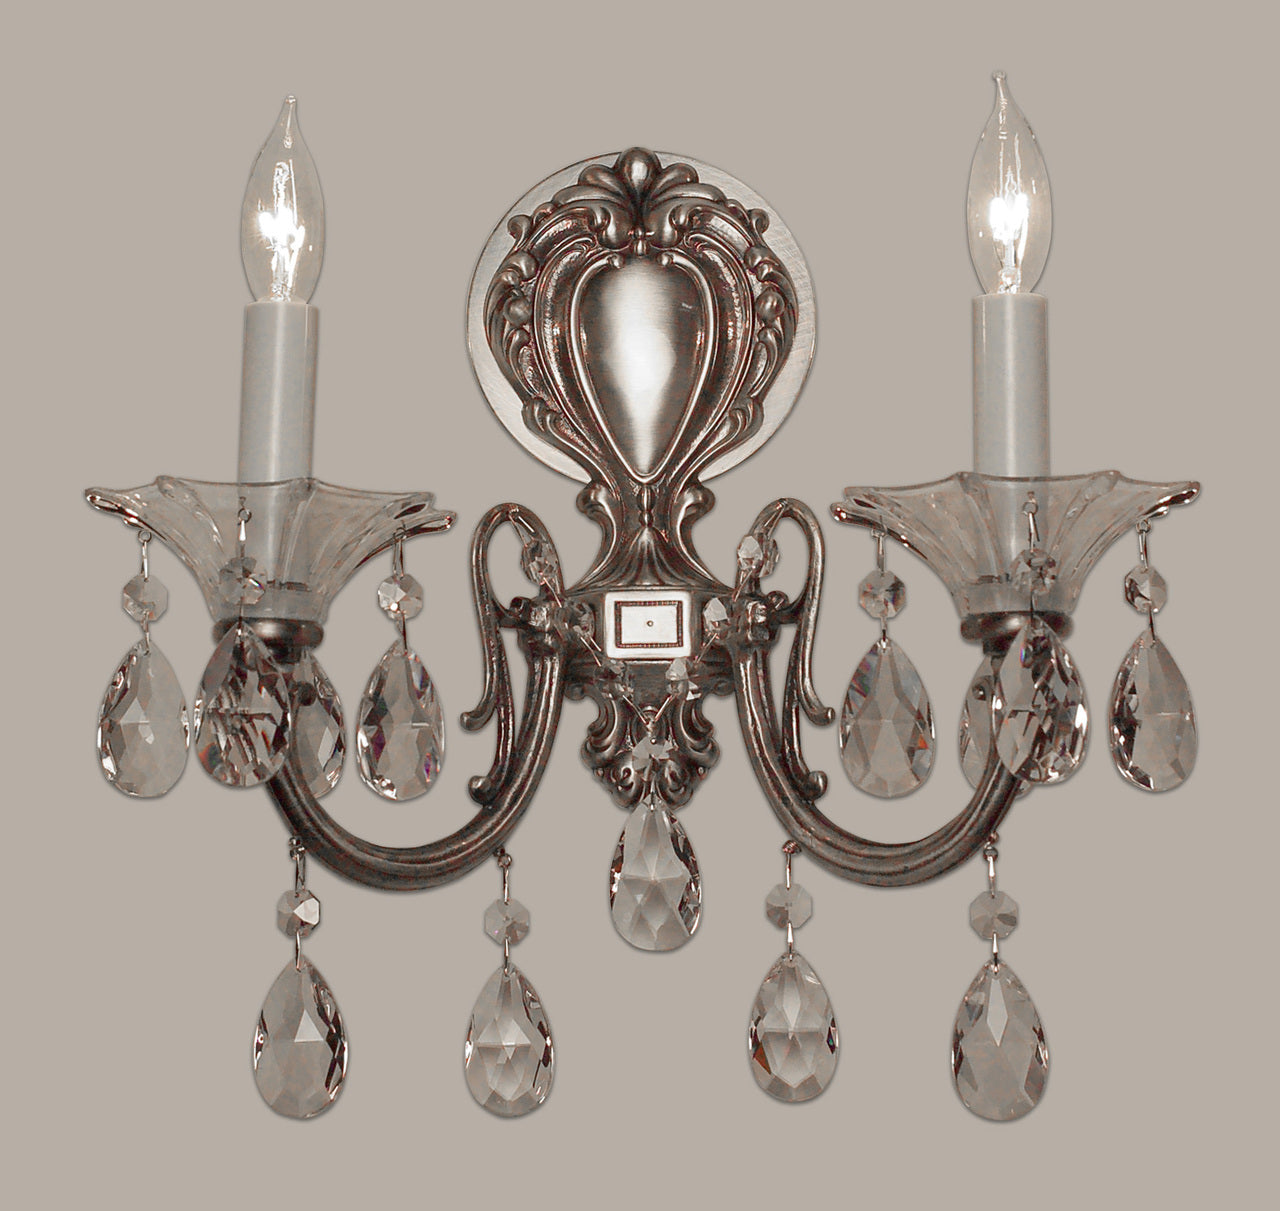 Classic Lighting 57052 SS CP Via Lombardi Crystal Wall Sconce in Silverstone (Imported from Spain)